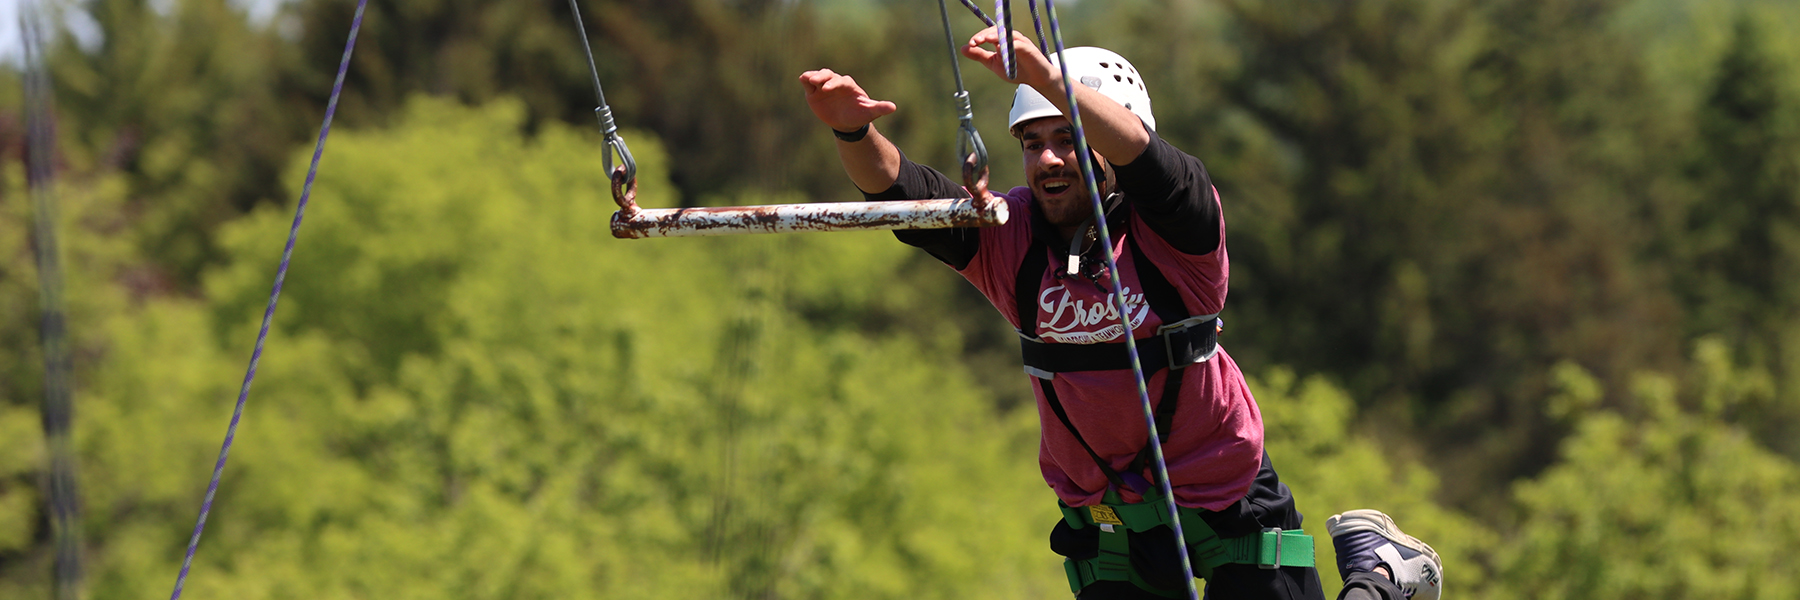 A male in a hemet and strapped into protective gear leaps forward to grab onto a hanging bar at a outdoor adventure course.